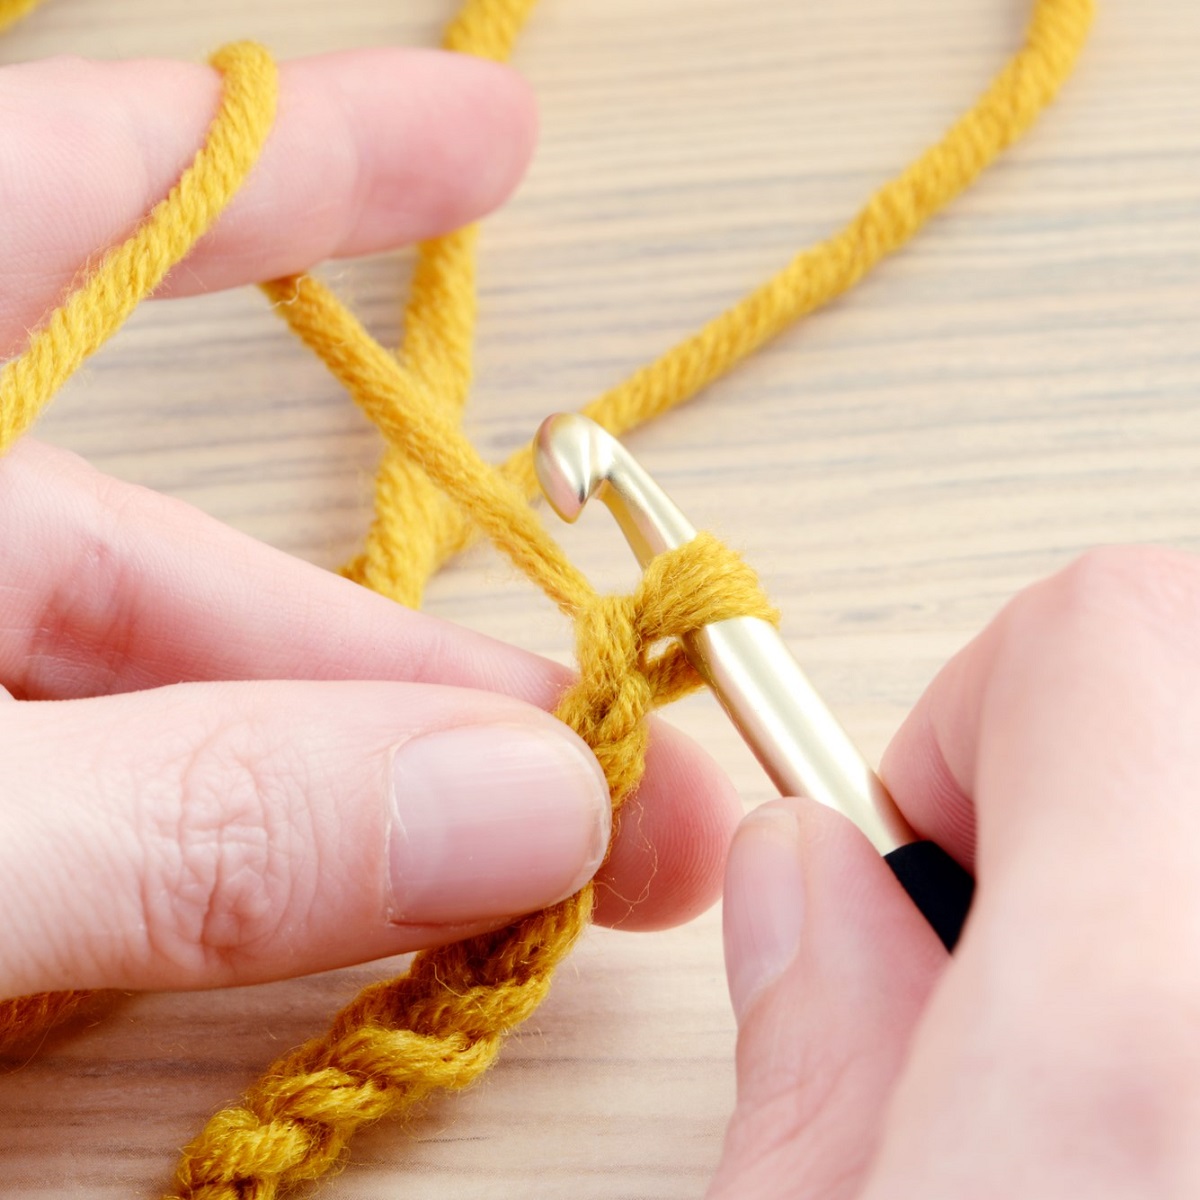 A woman's hands crocheting with yellow yarn.